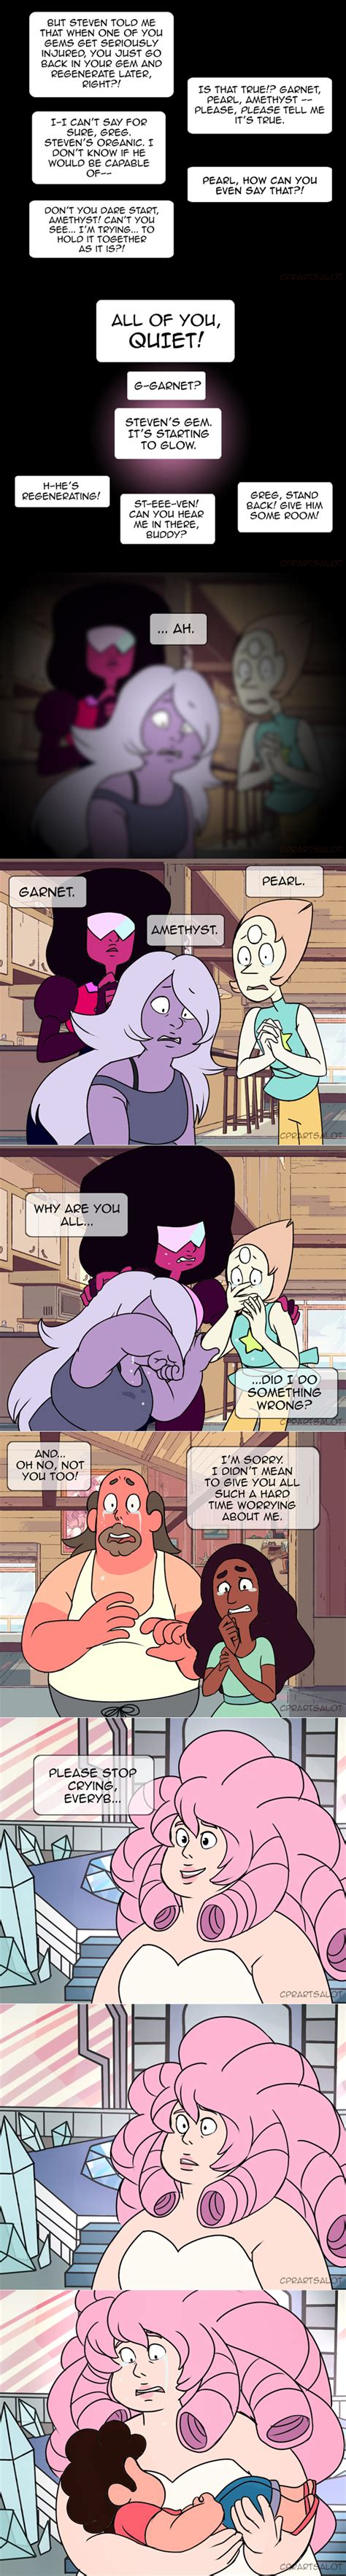 If Steven Is Half Human And Since Gems Bodys Are Like Holograms With